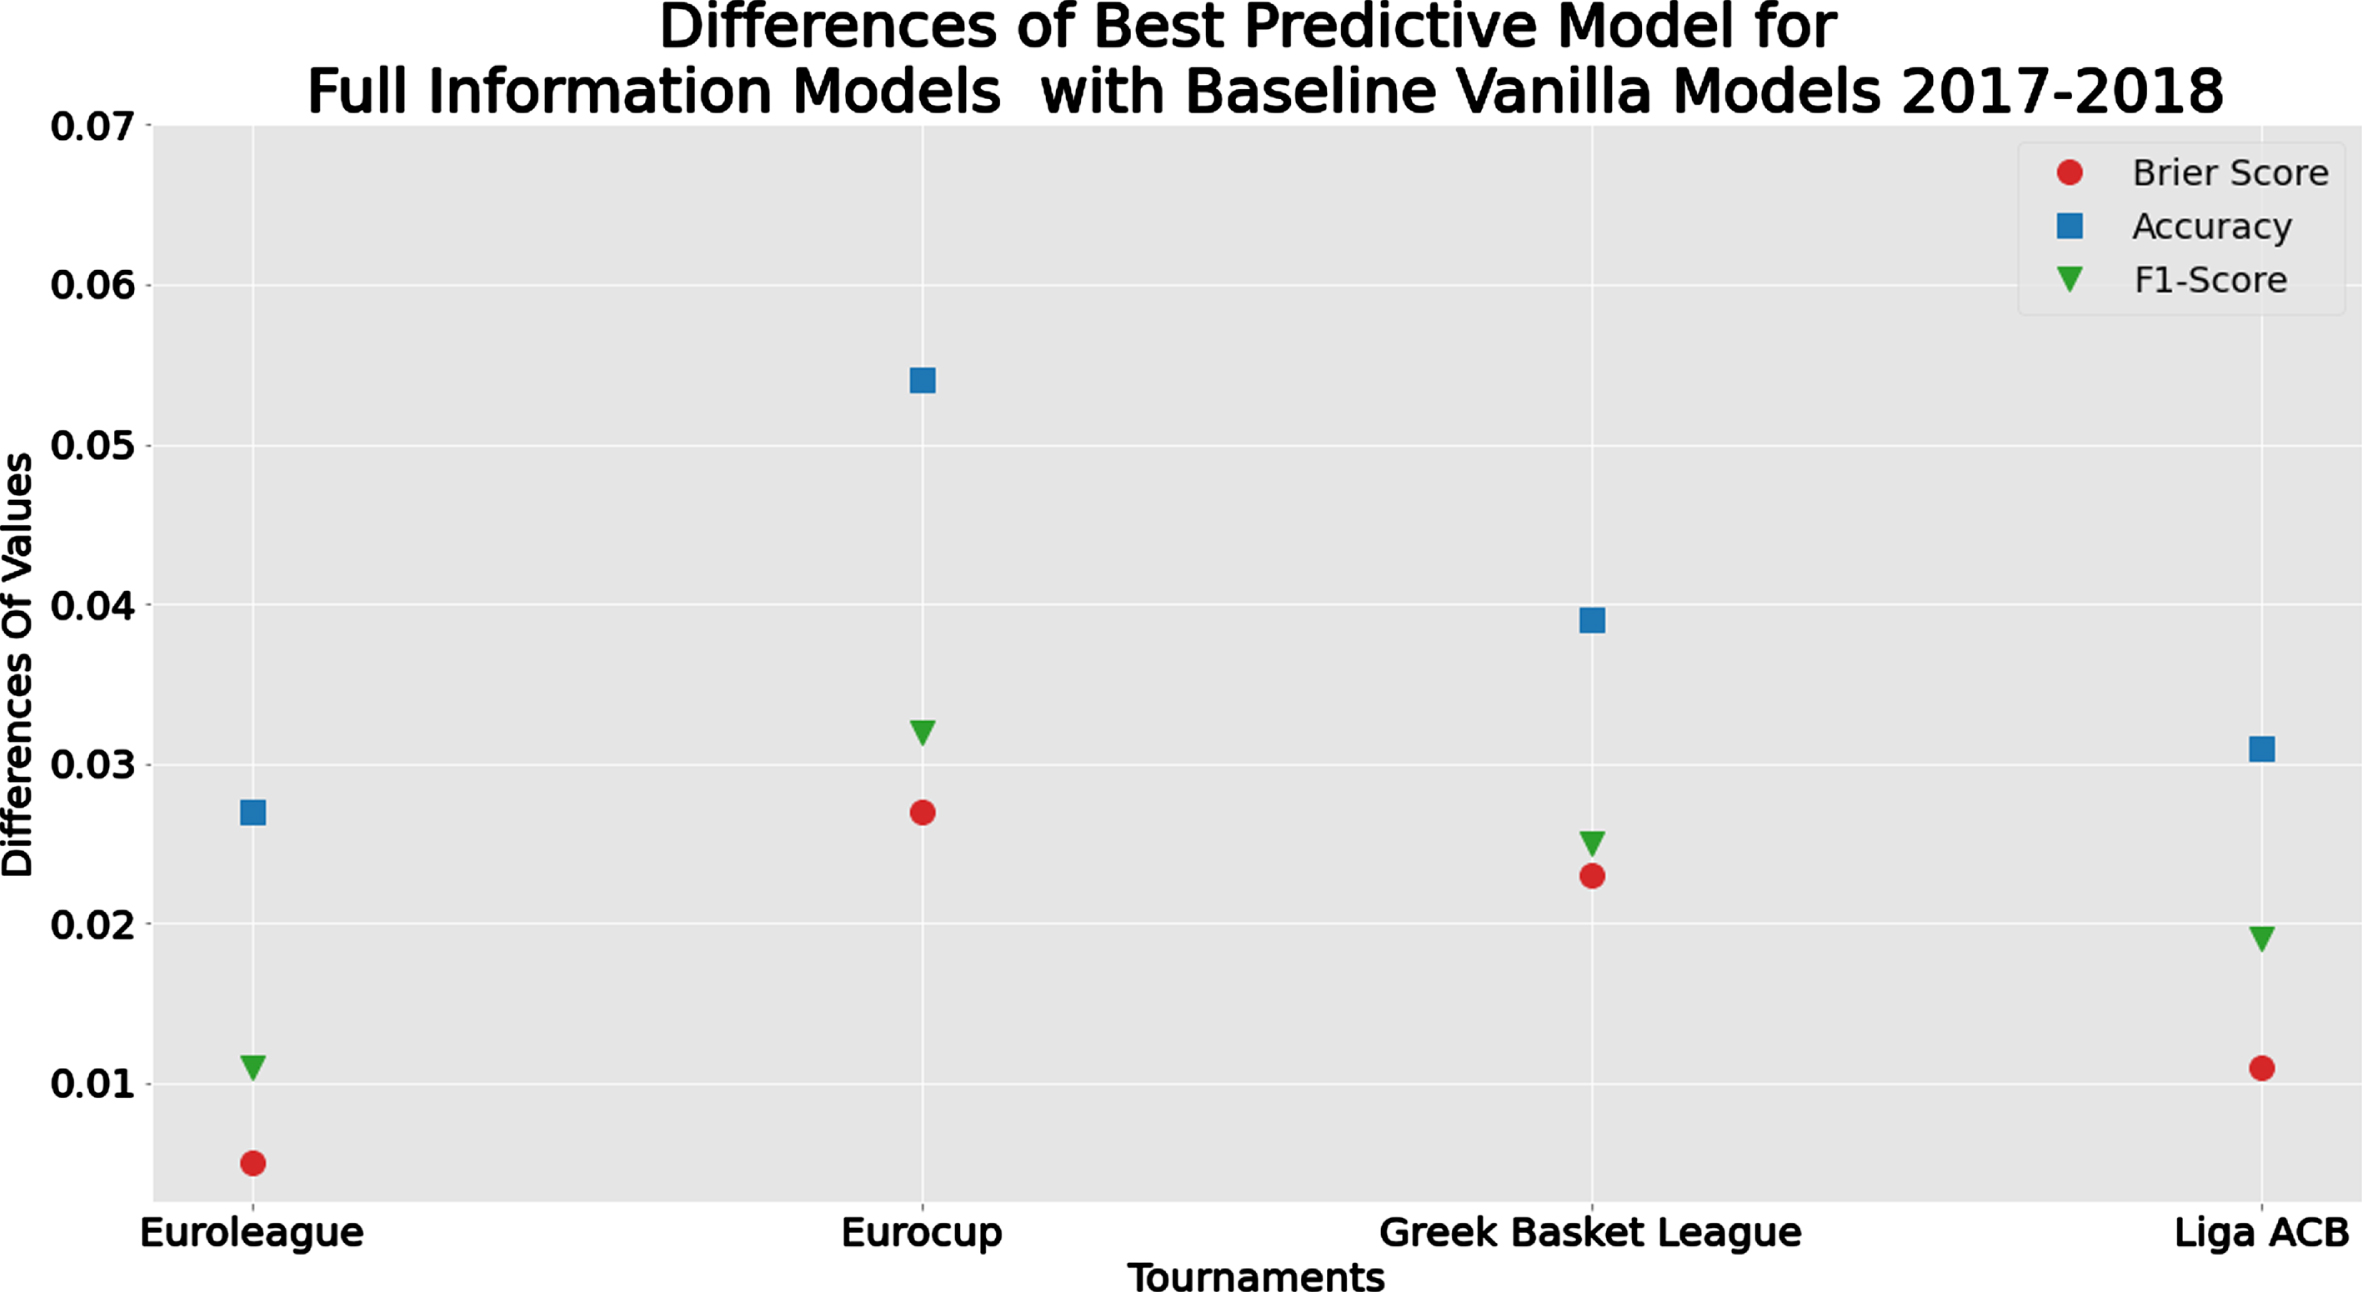 Comparison of the differences of evaluation metrics between the best performed methods of the Full Information and the Baseline Vanilla Model for the full season prediction scenario.